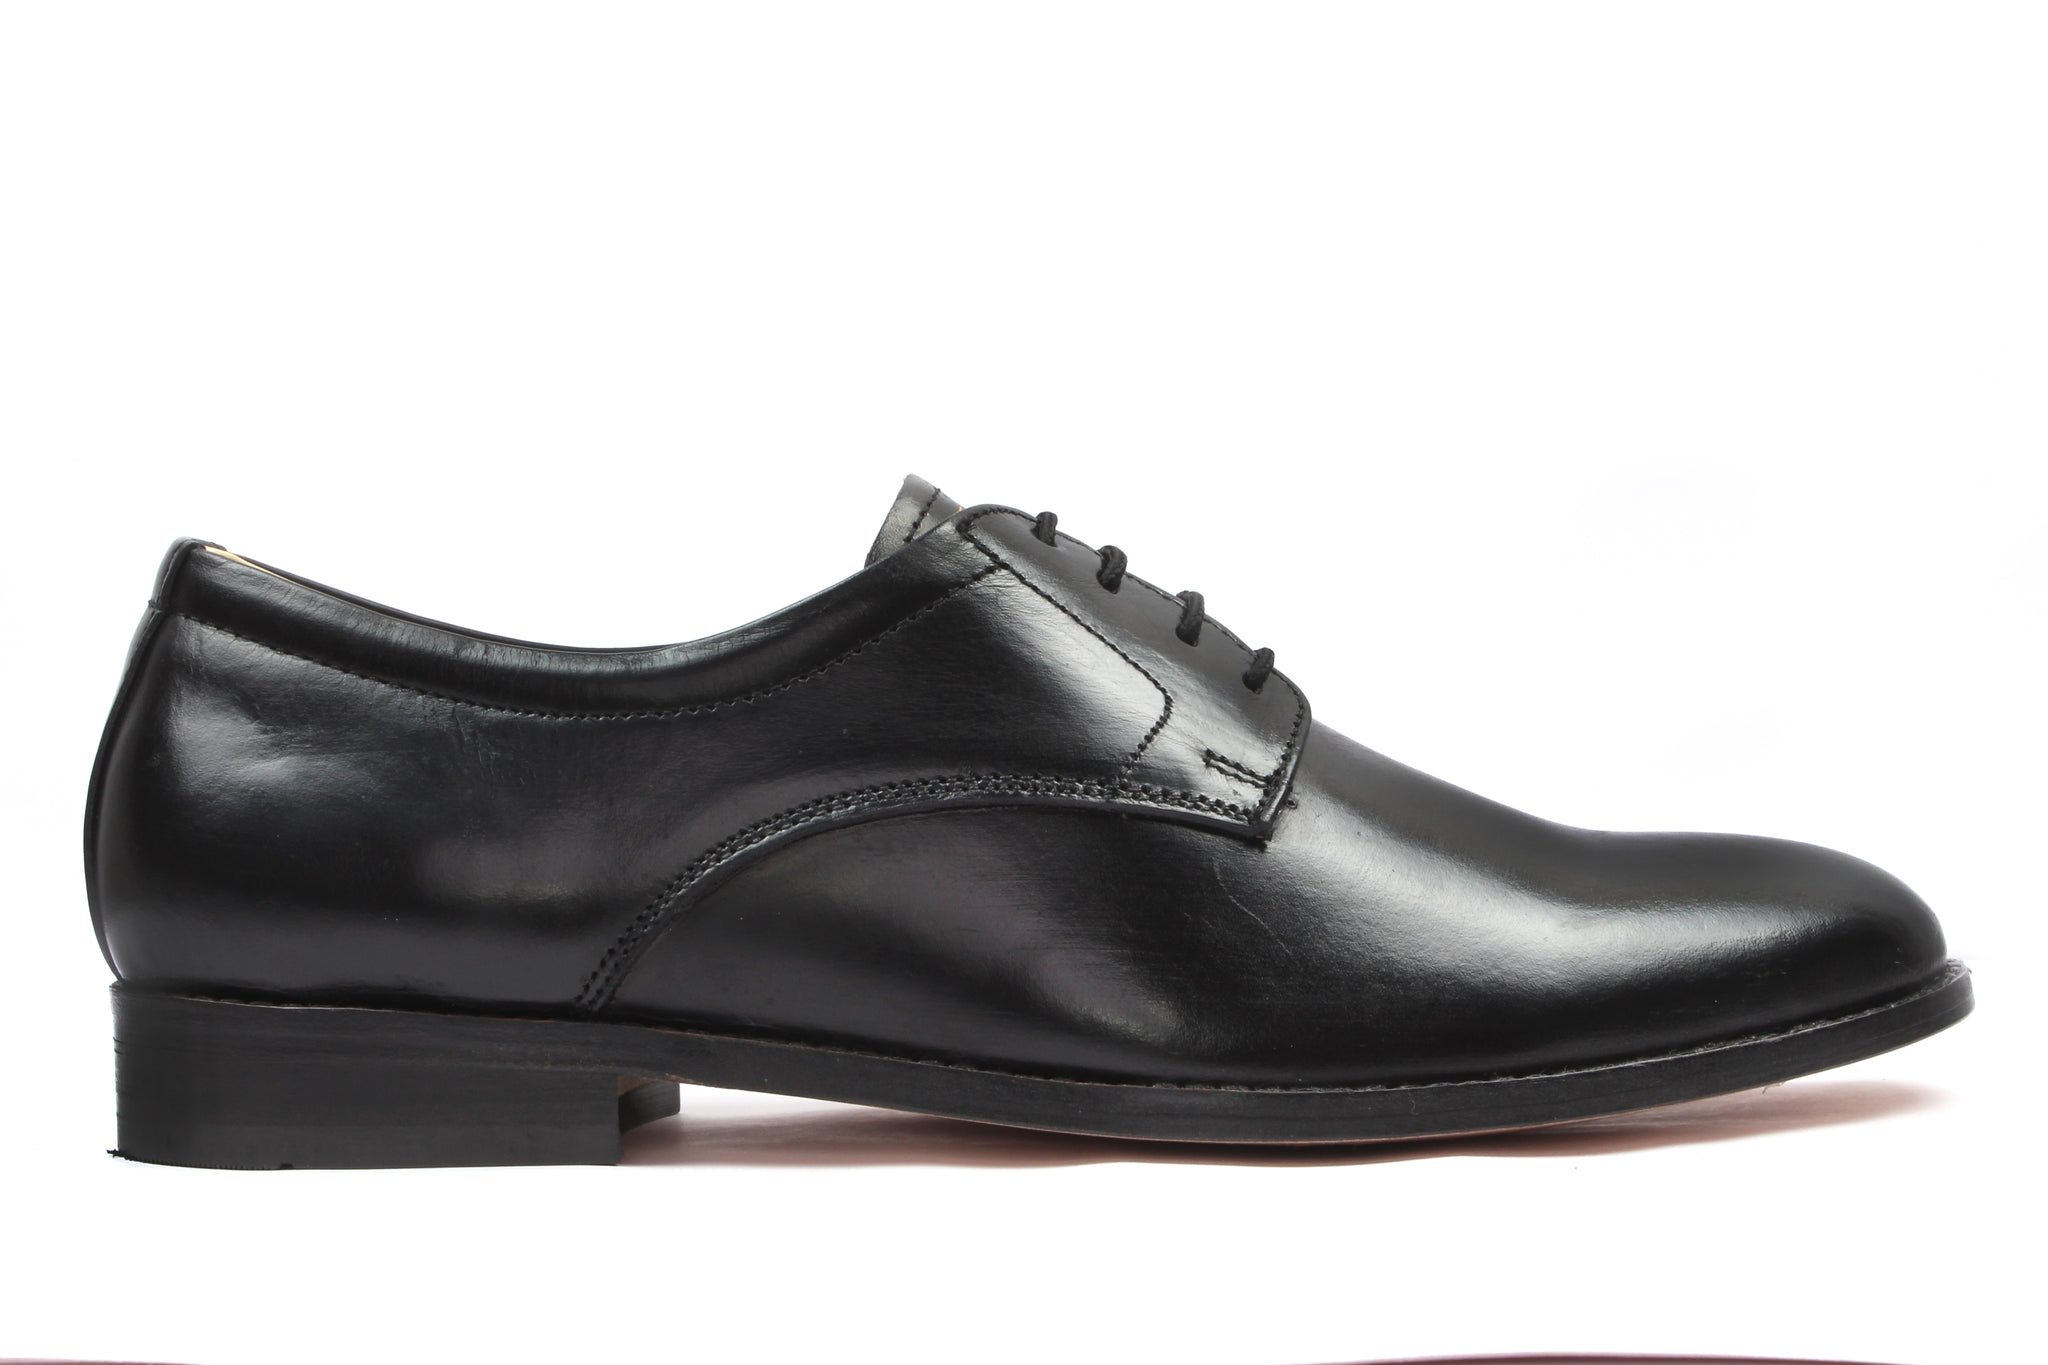 Men's Office Black Shoe with 4 hole laces Designed by Cotton Cool ...